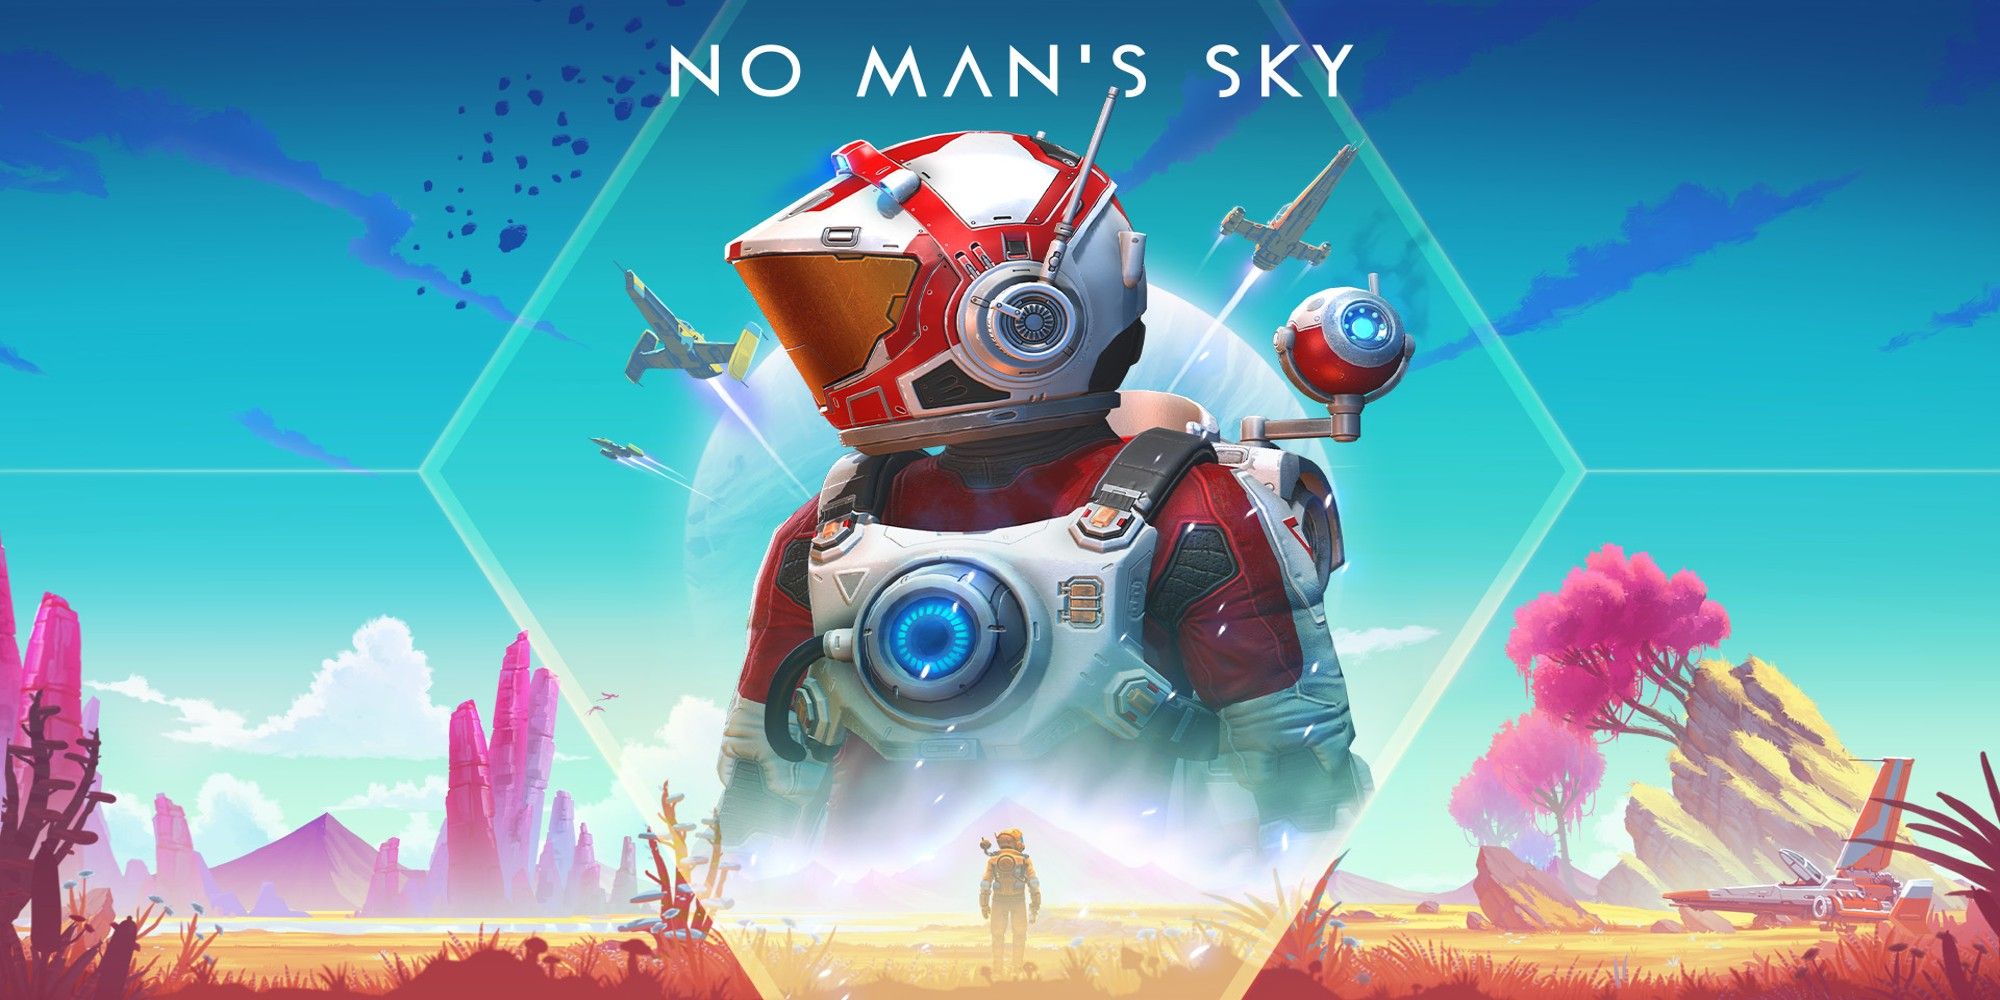 An astronaut looks on in a promo image for No Man's Sky 